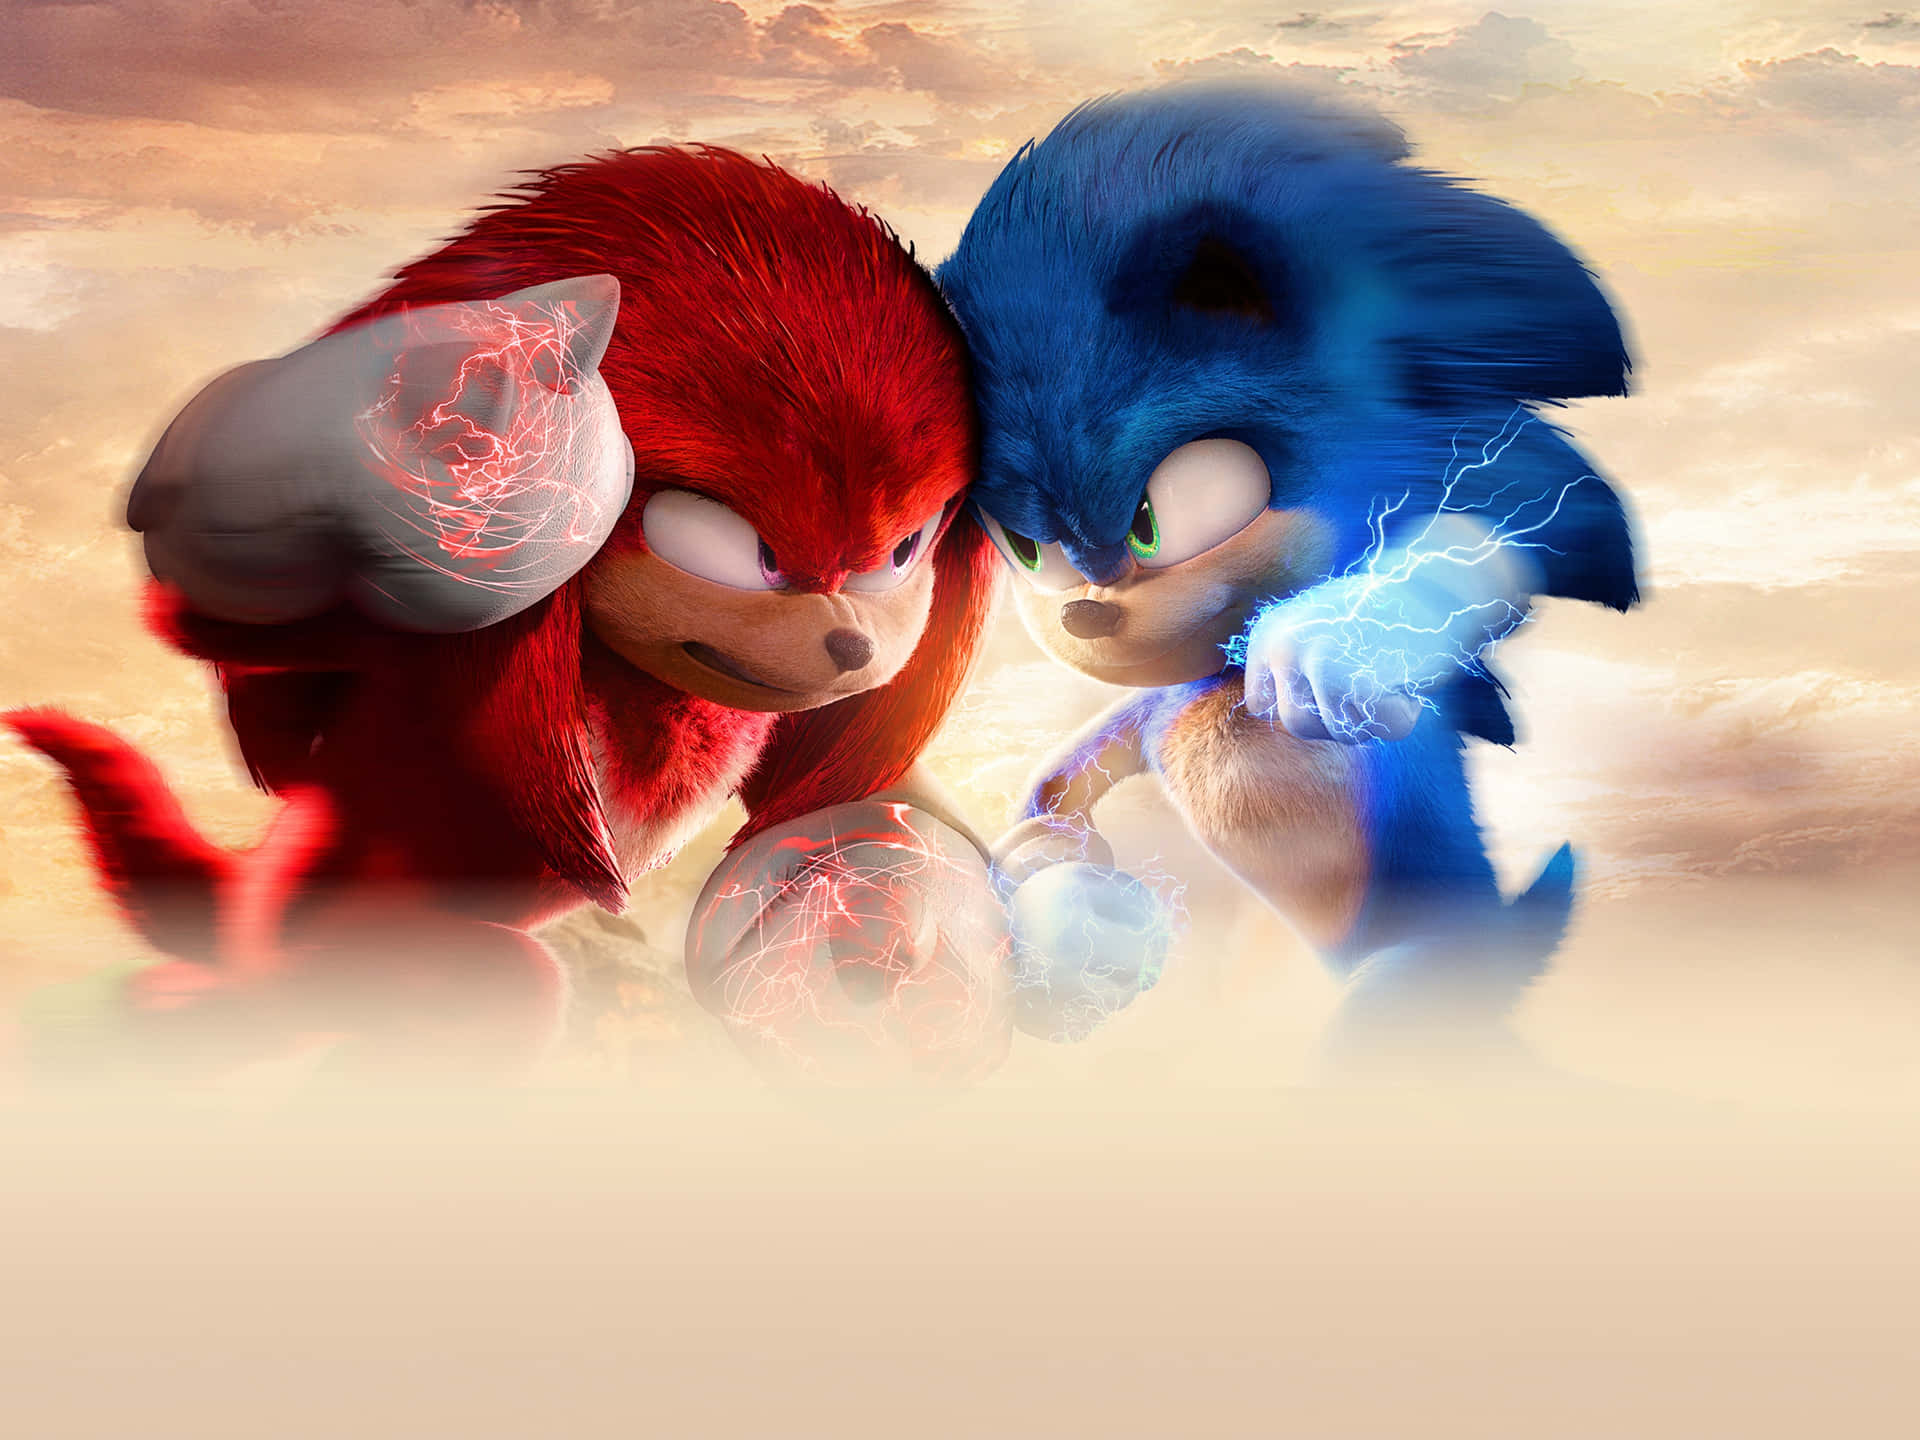 Knuckles The Echidna From The Sonic The Hedgehog Universe